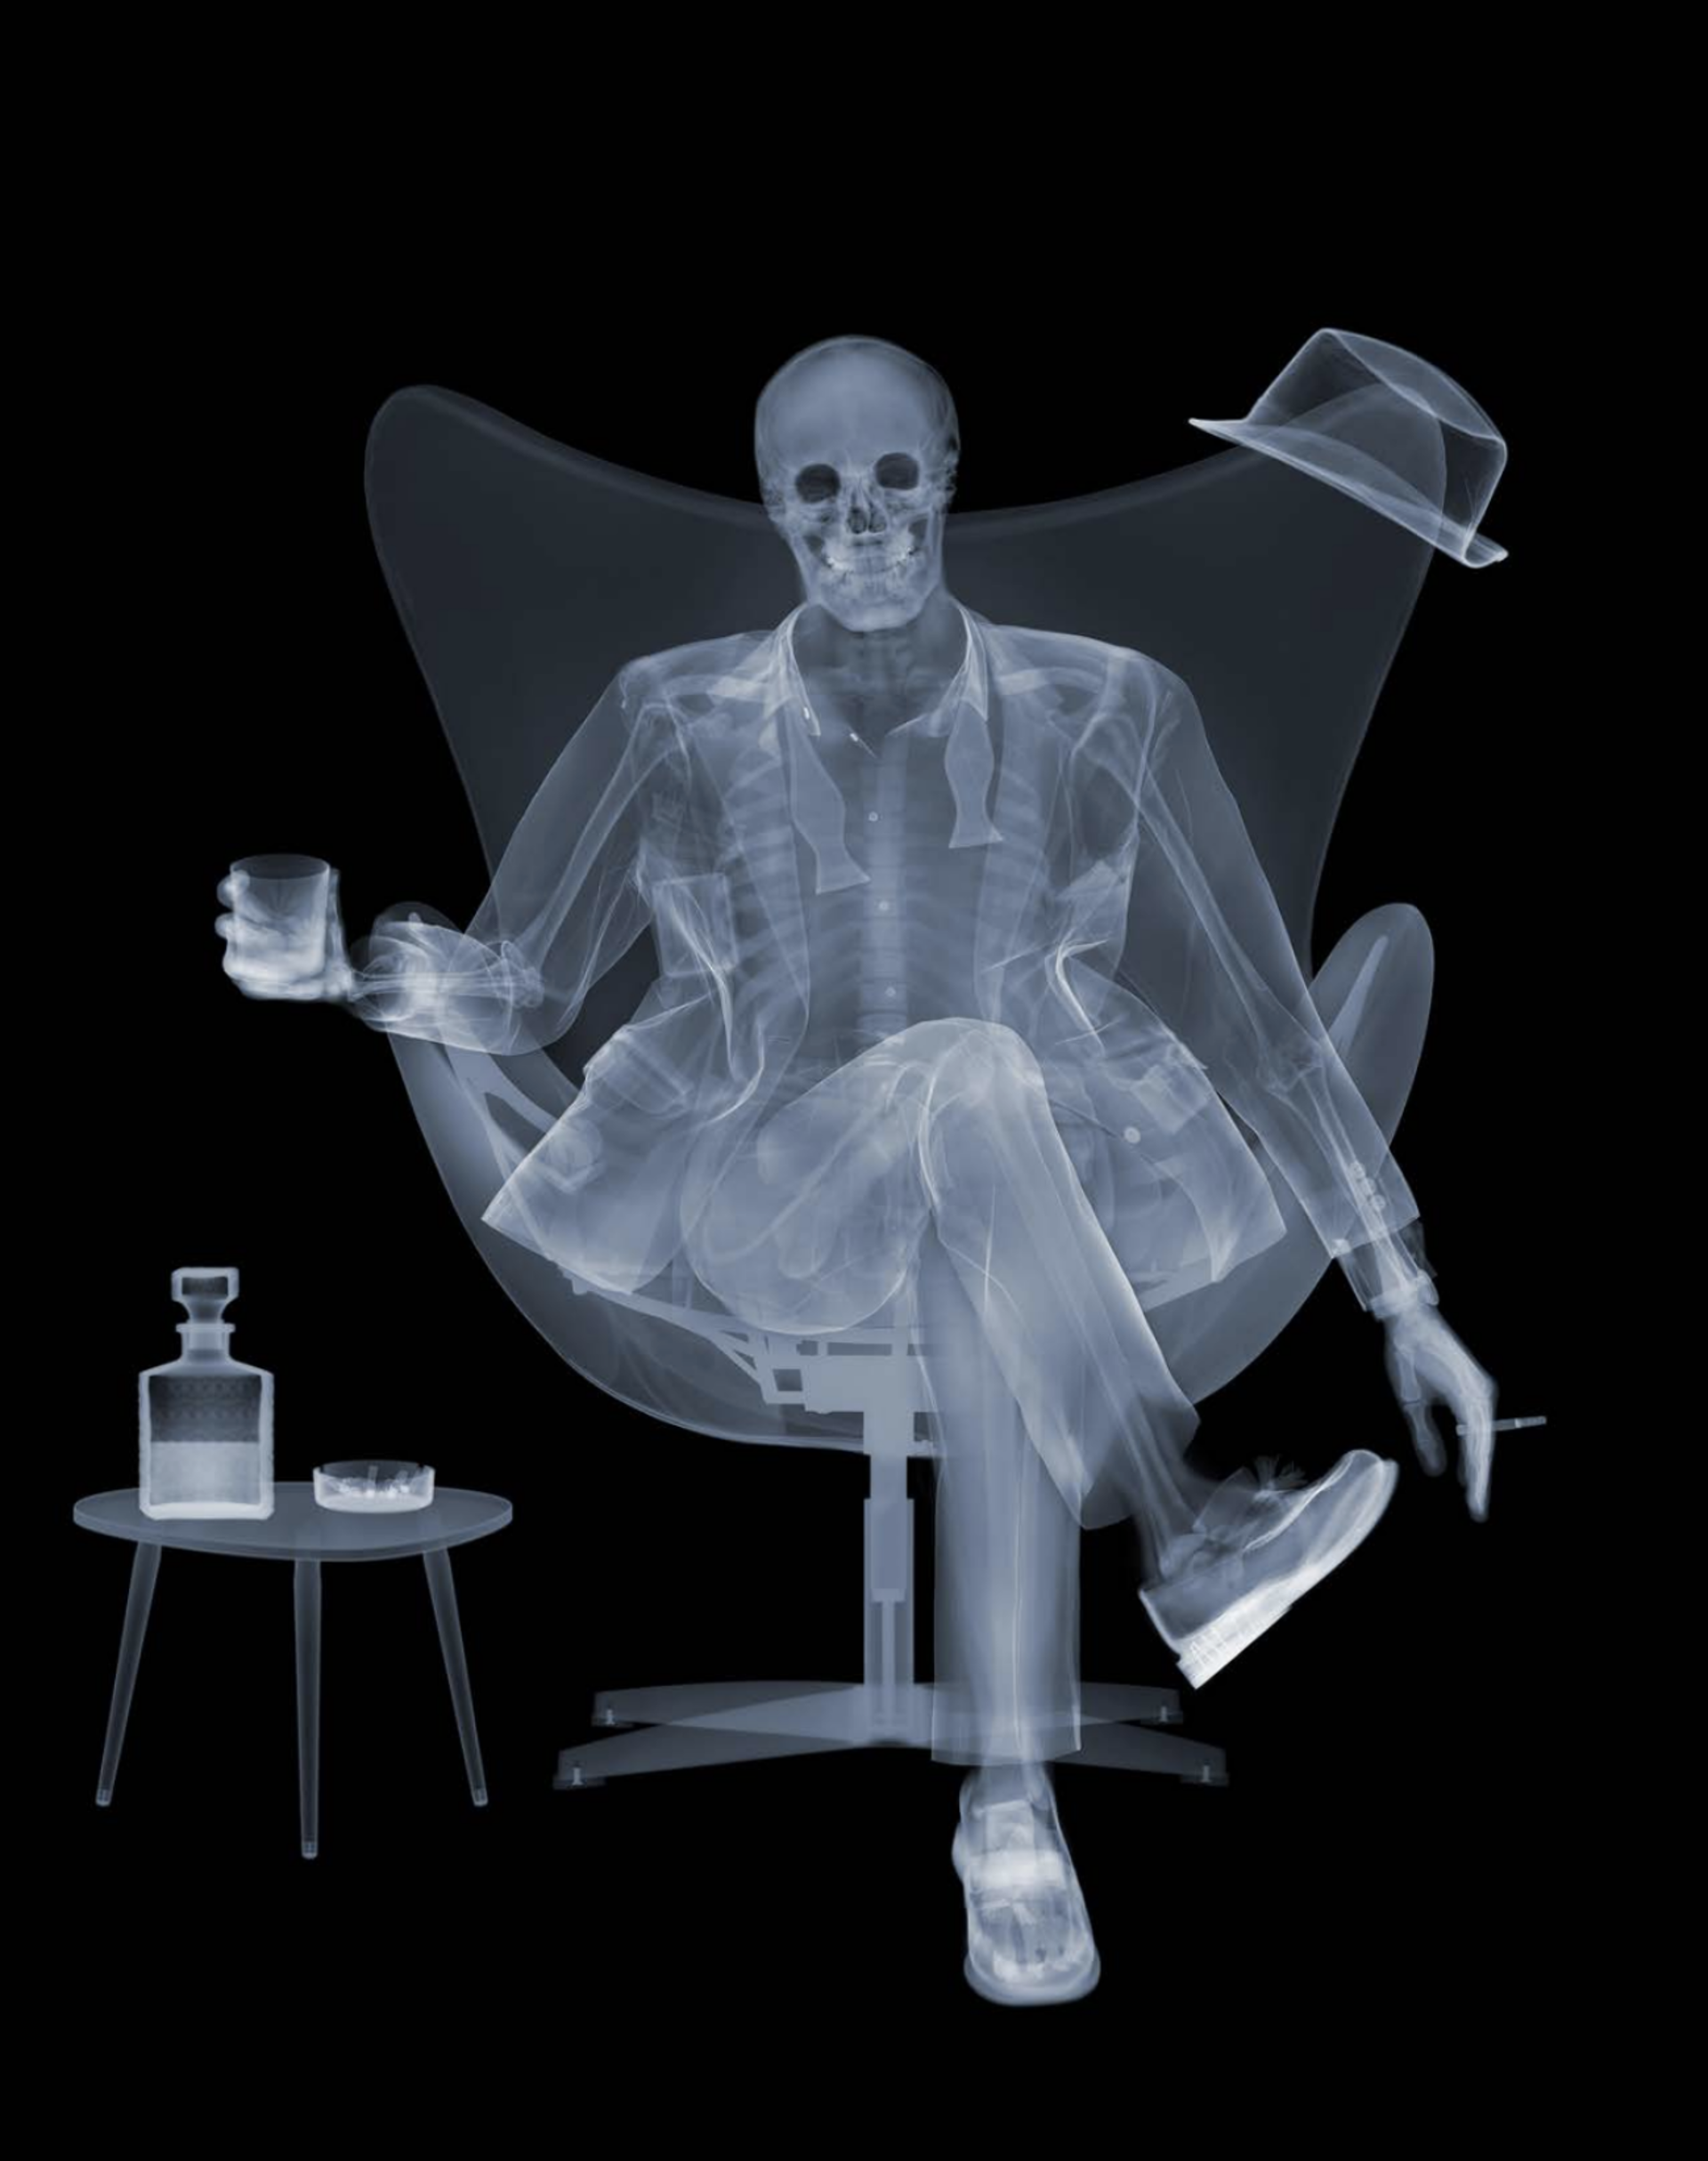 Rat Pack II by Nick Veasey